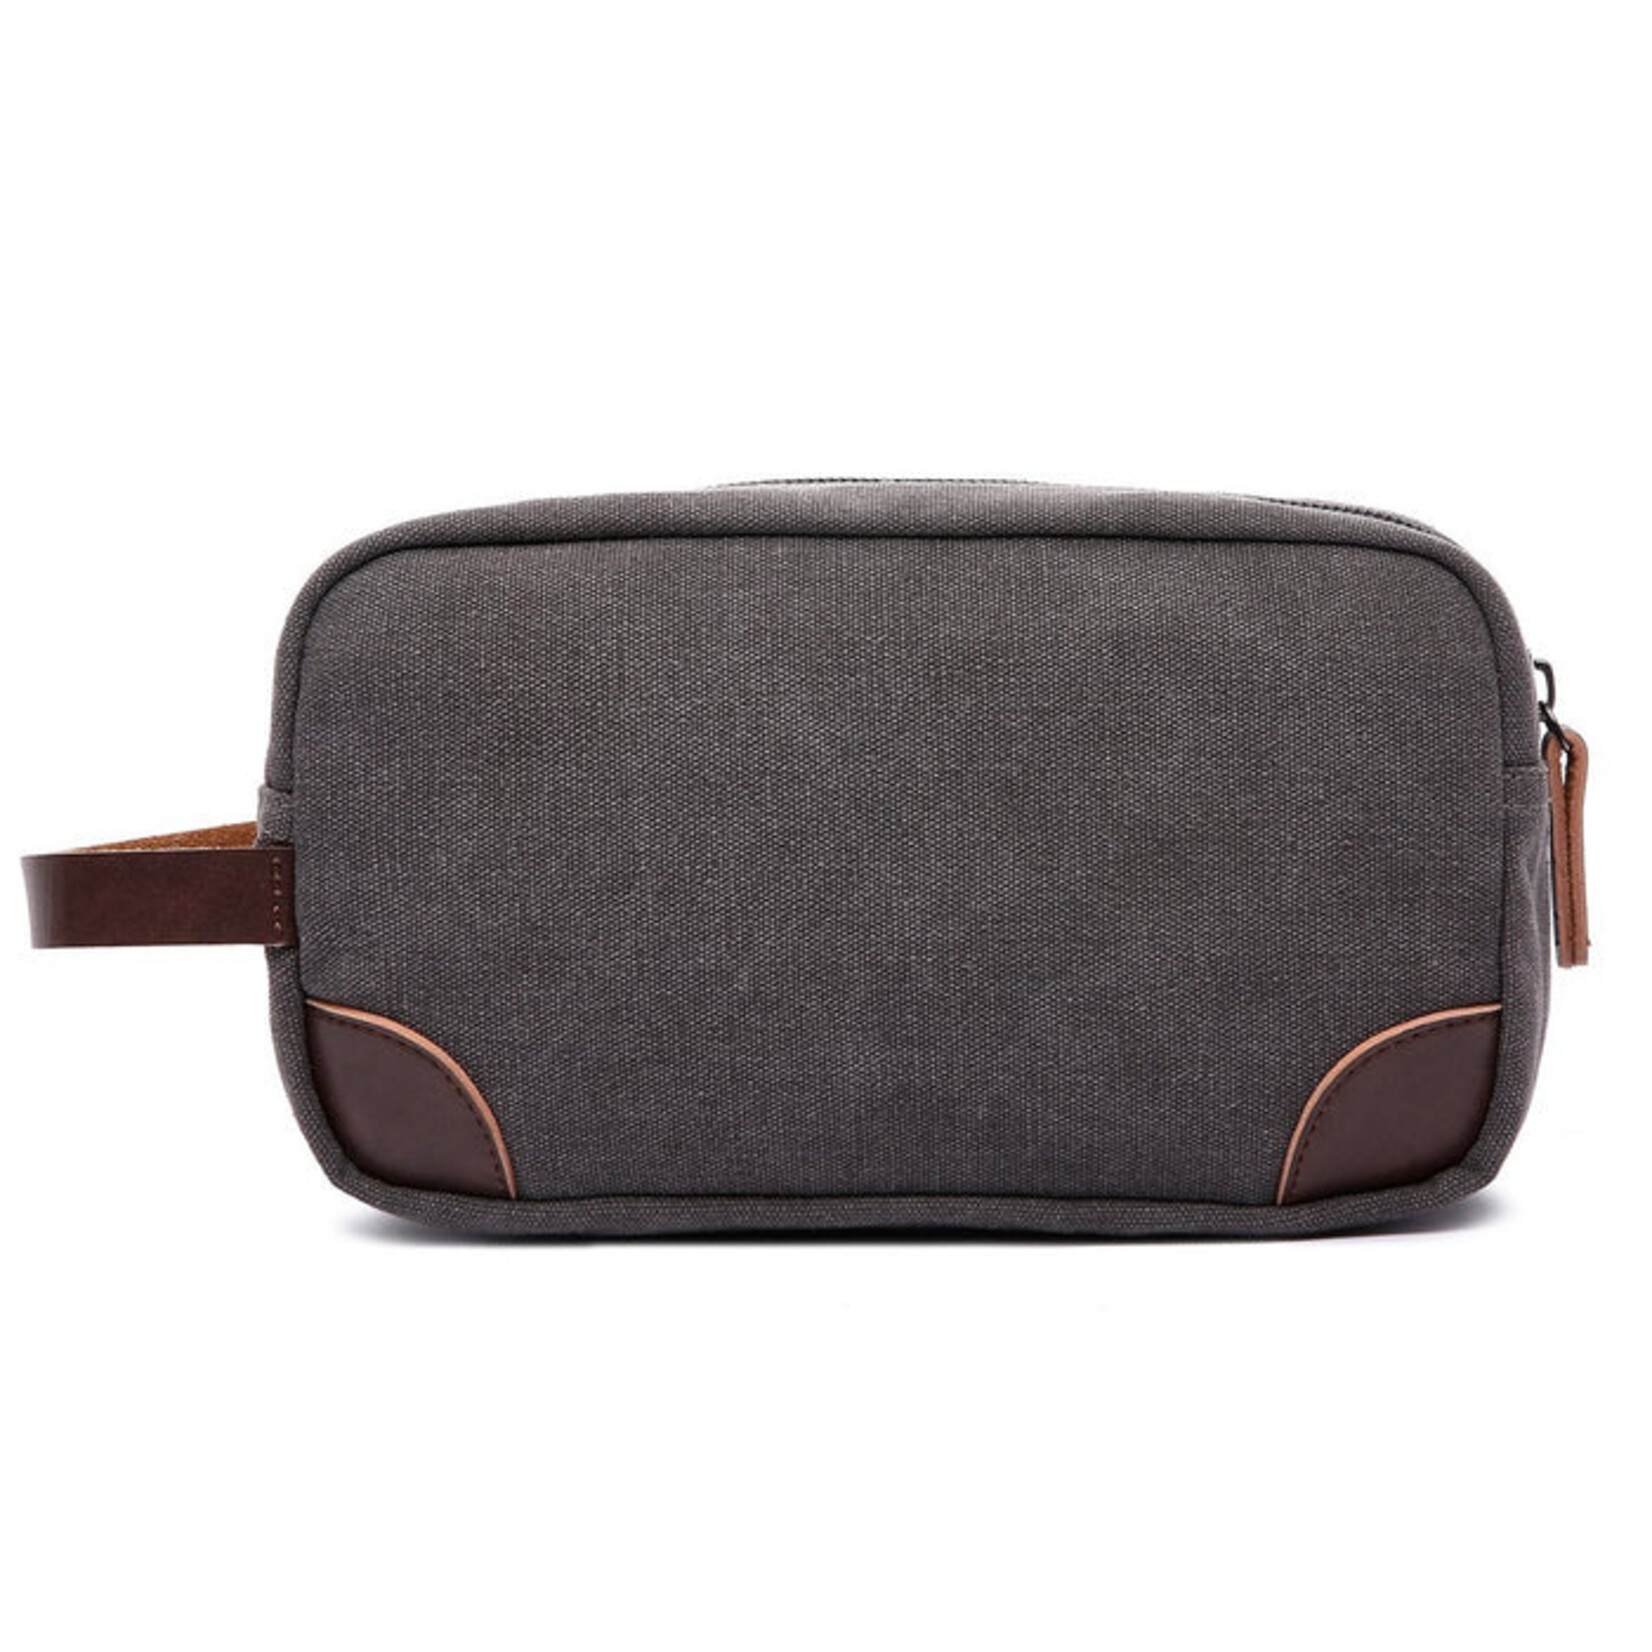 Grey Canvas and Leather Dopp Kit